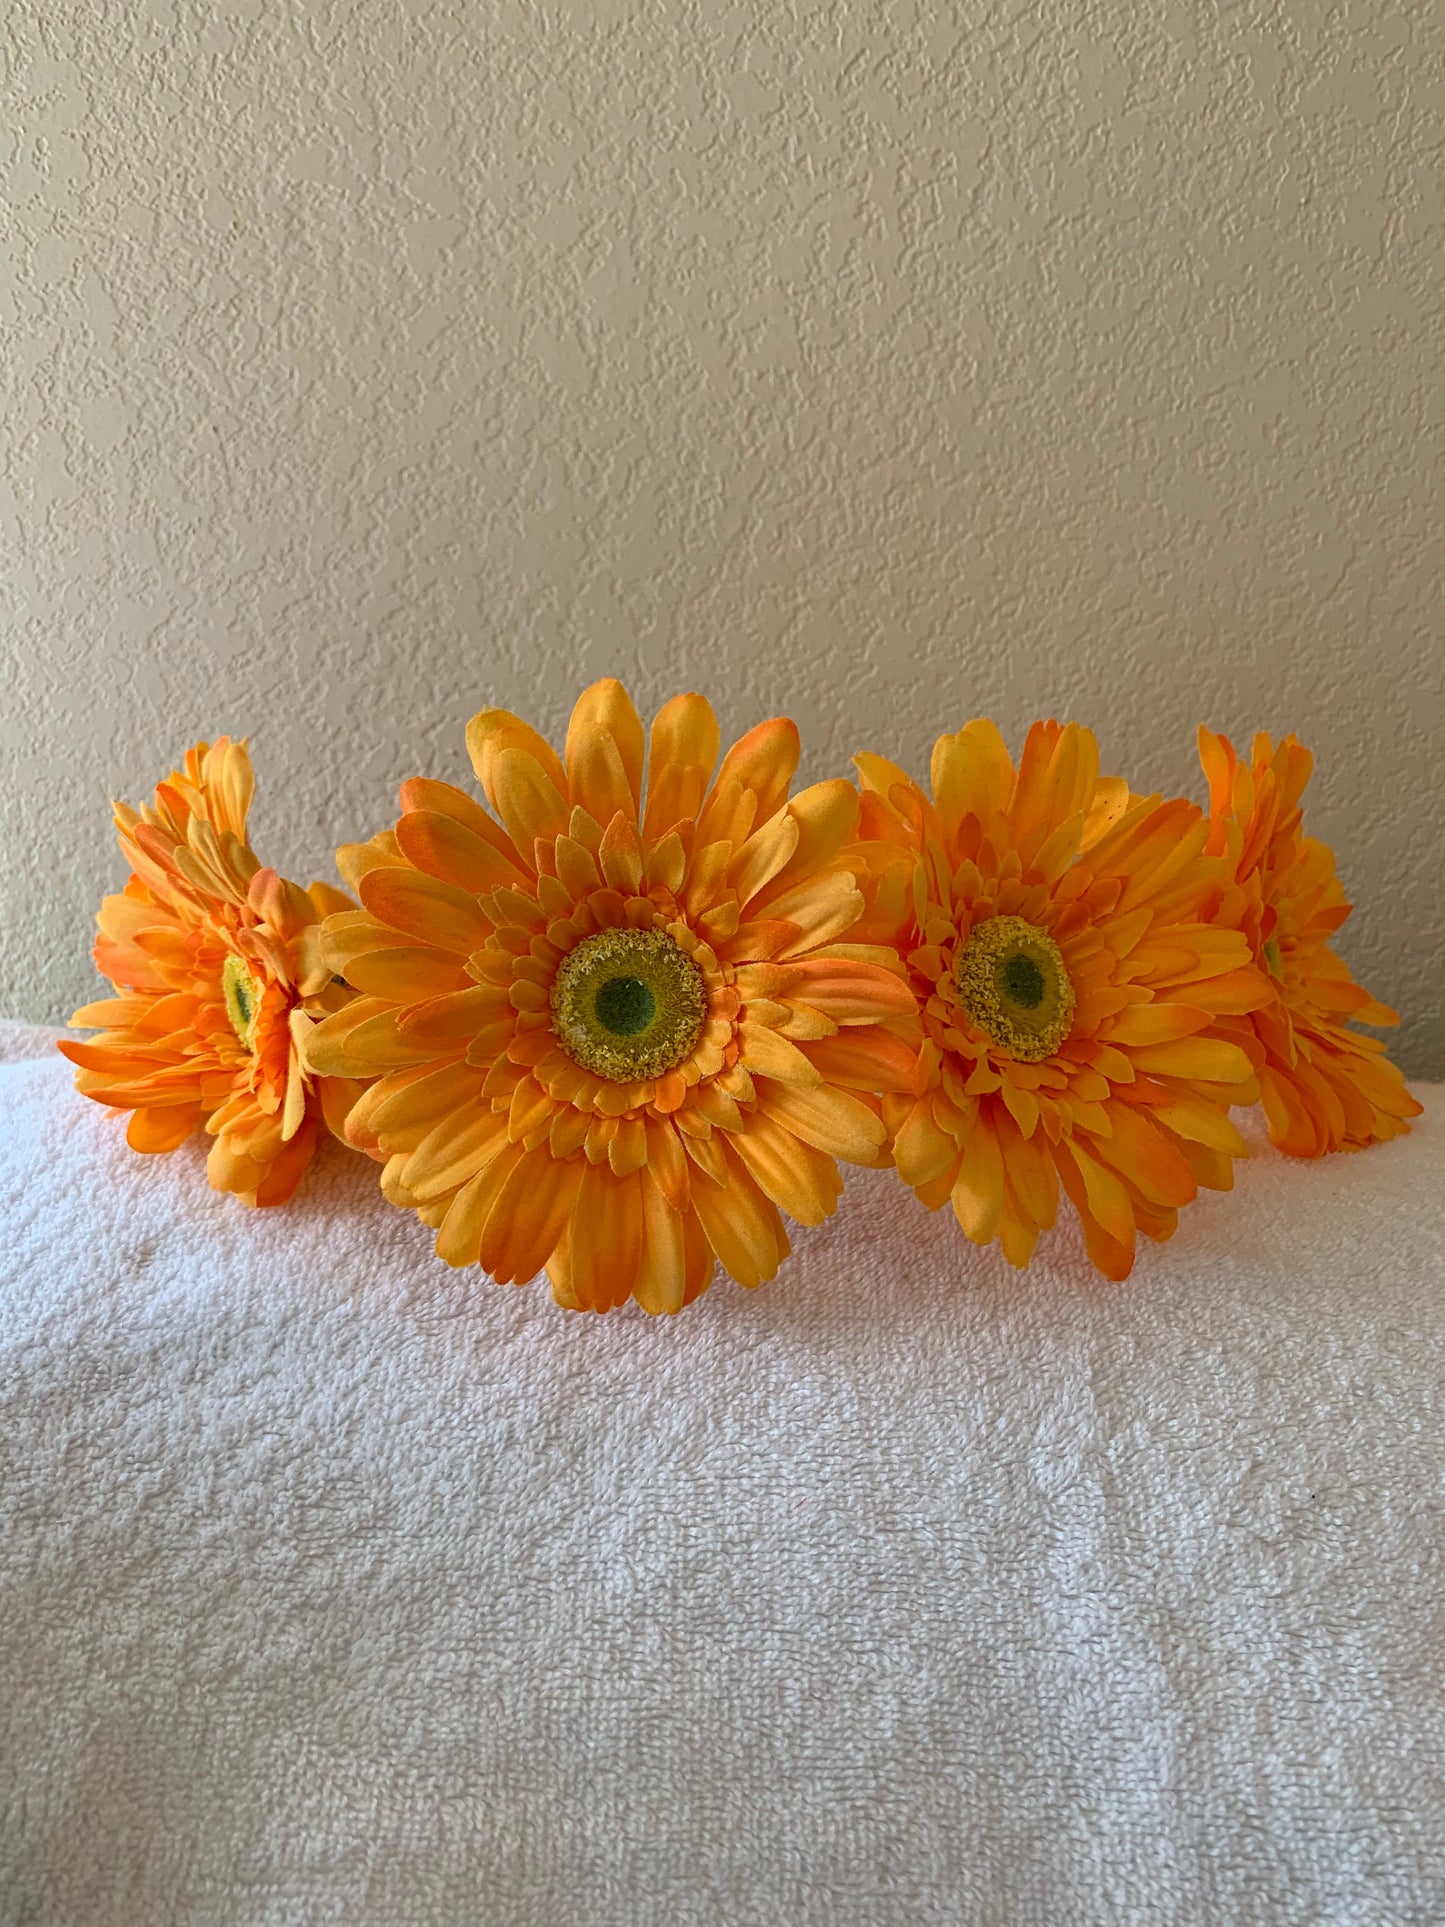 Large Wreath Lighted - Orangie Yellow Daisies